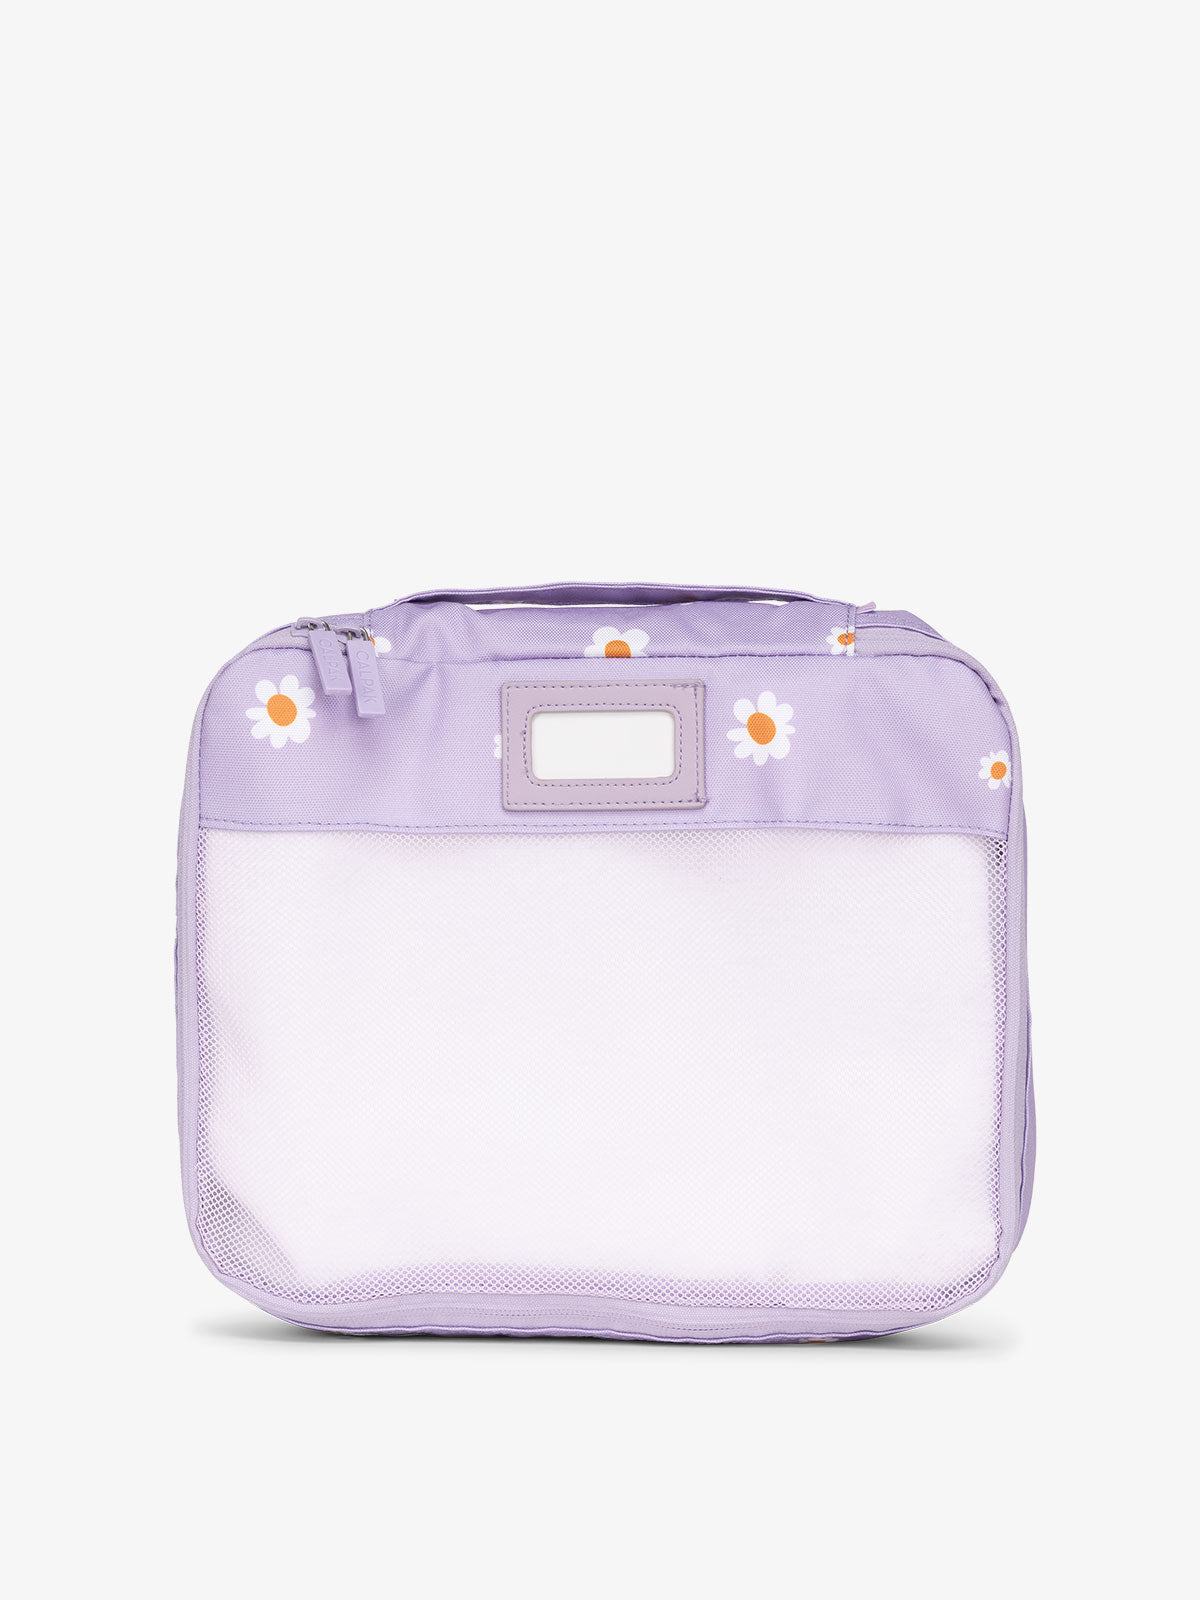 CALPAK luggage packing cubes for clothes with mesh front and label in orchid fields lavender